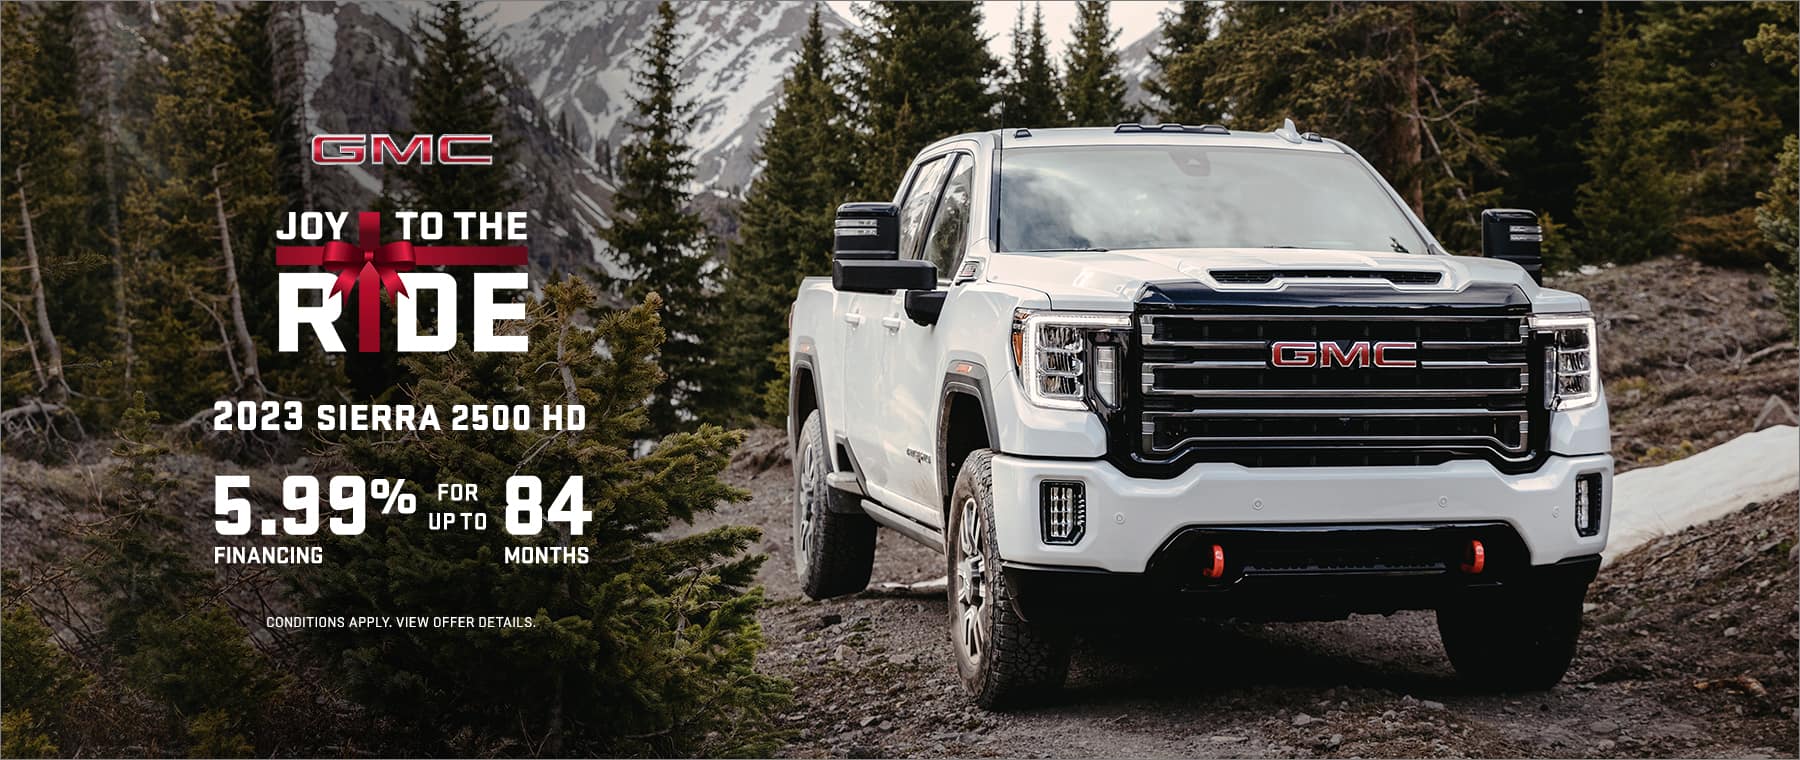 Get 5.99% financing for up to 84 months on a new 2023 GMC Sierra 2500 HD